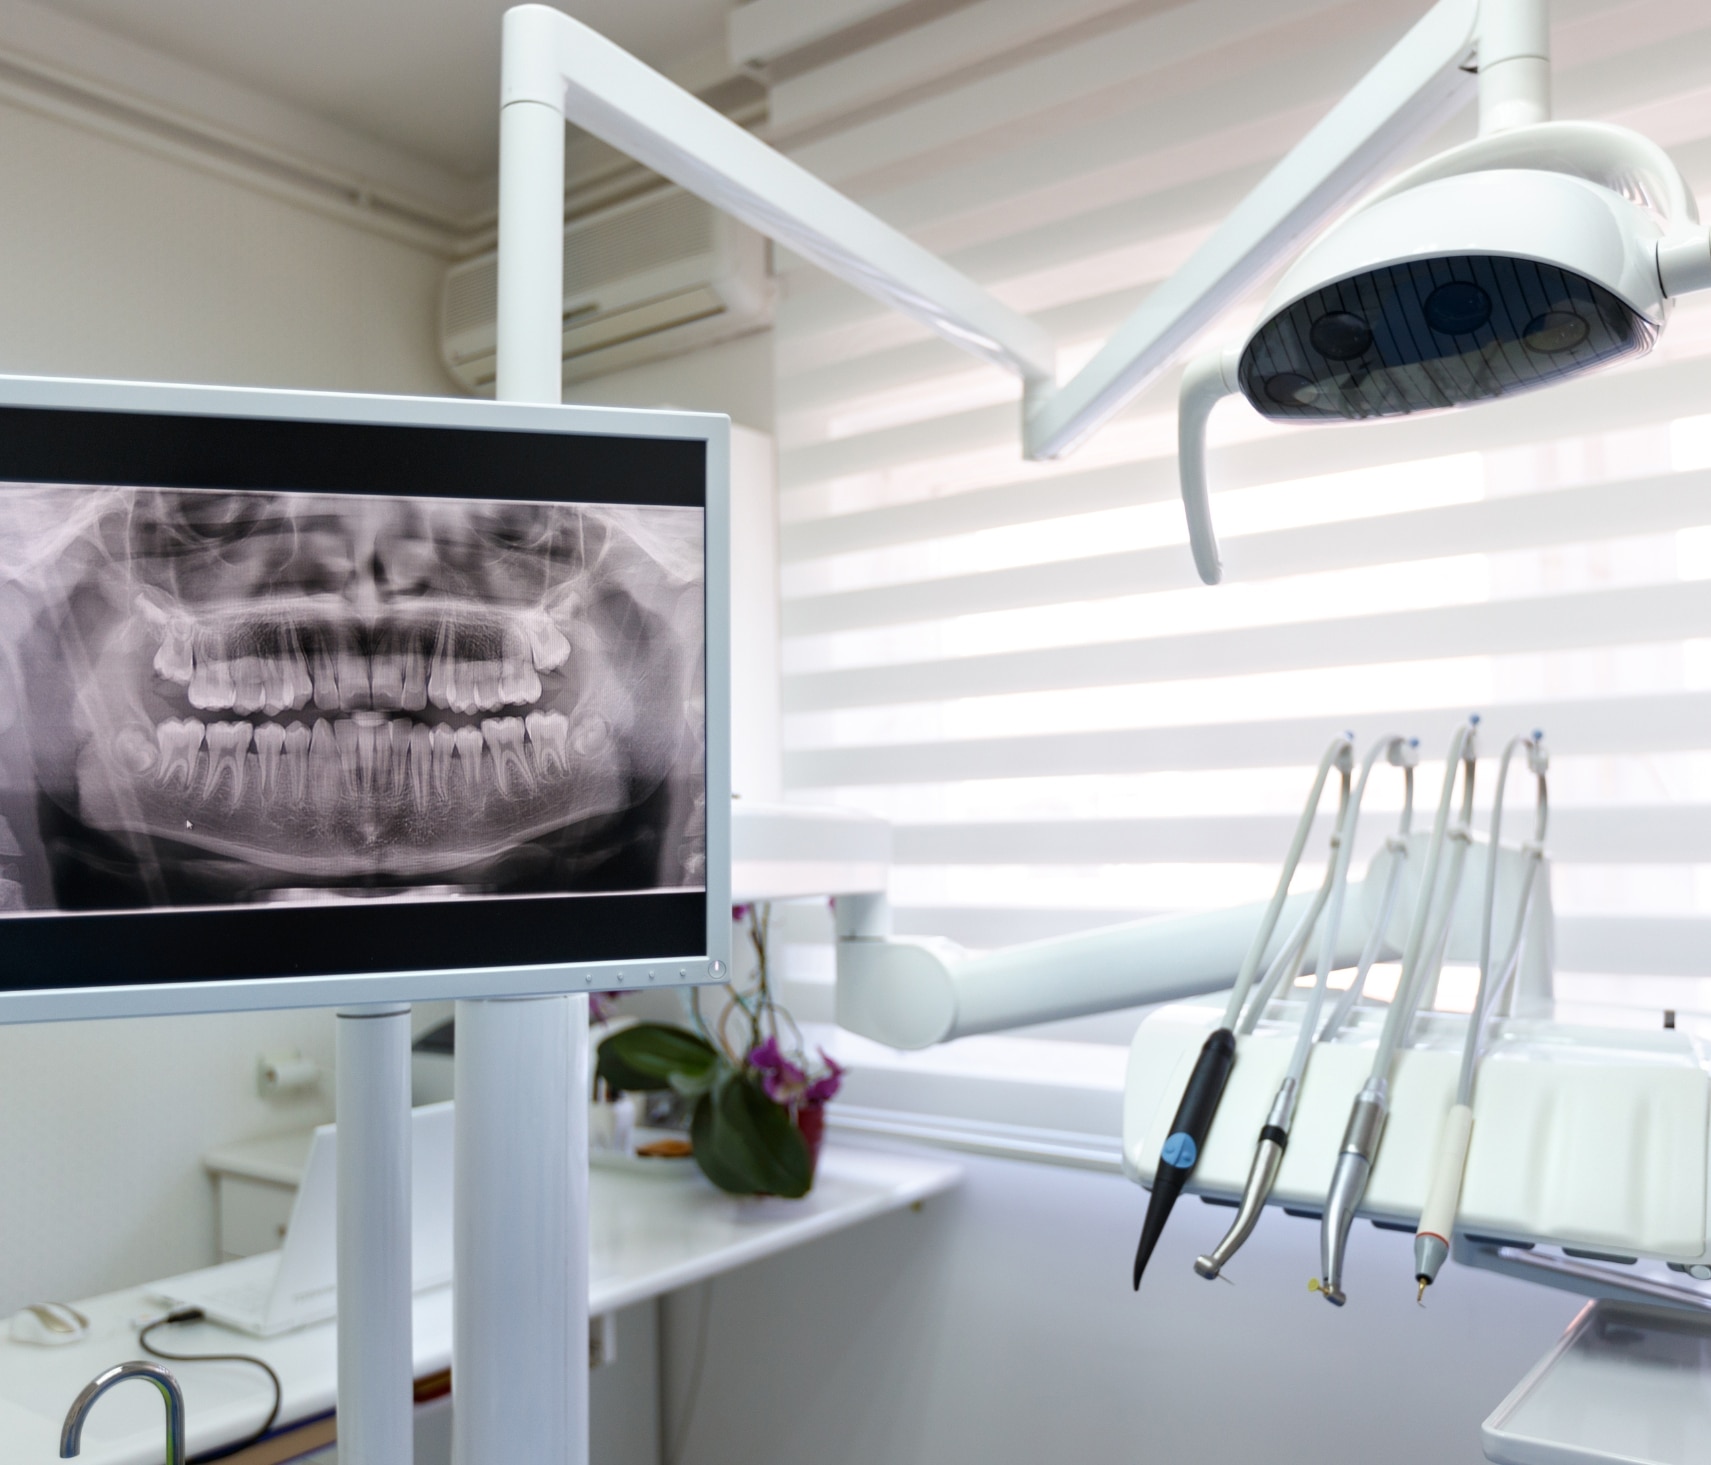 Uncover the Benefits: How Digital Dental X-Rays Improve Your Oral Health"